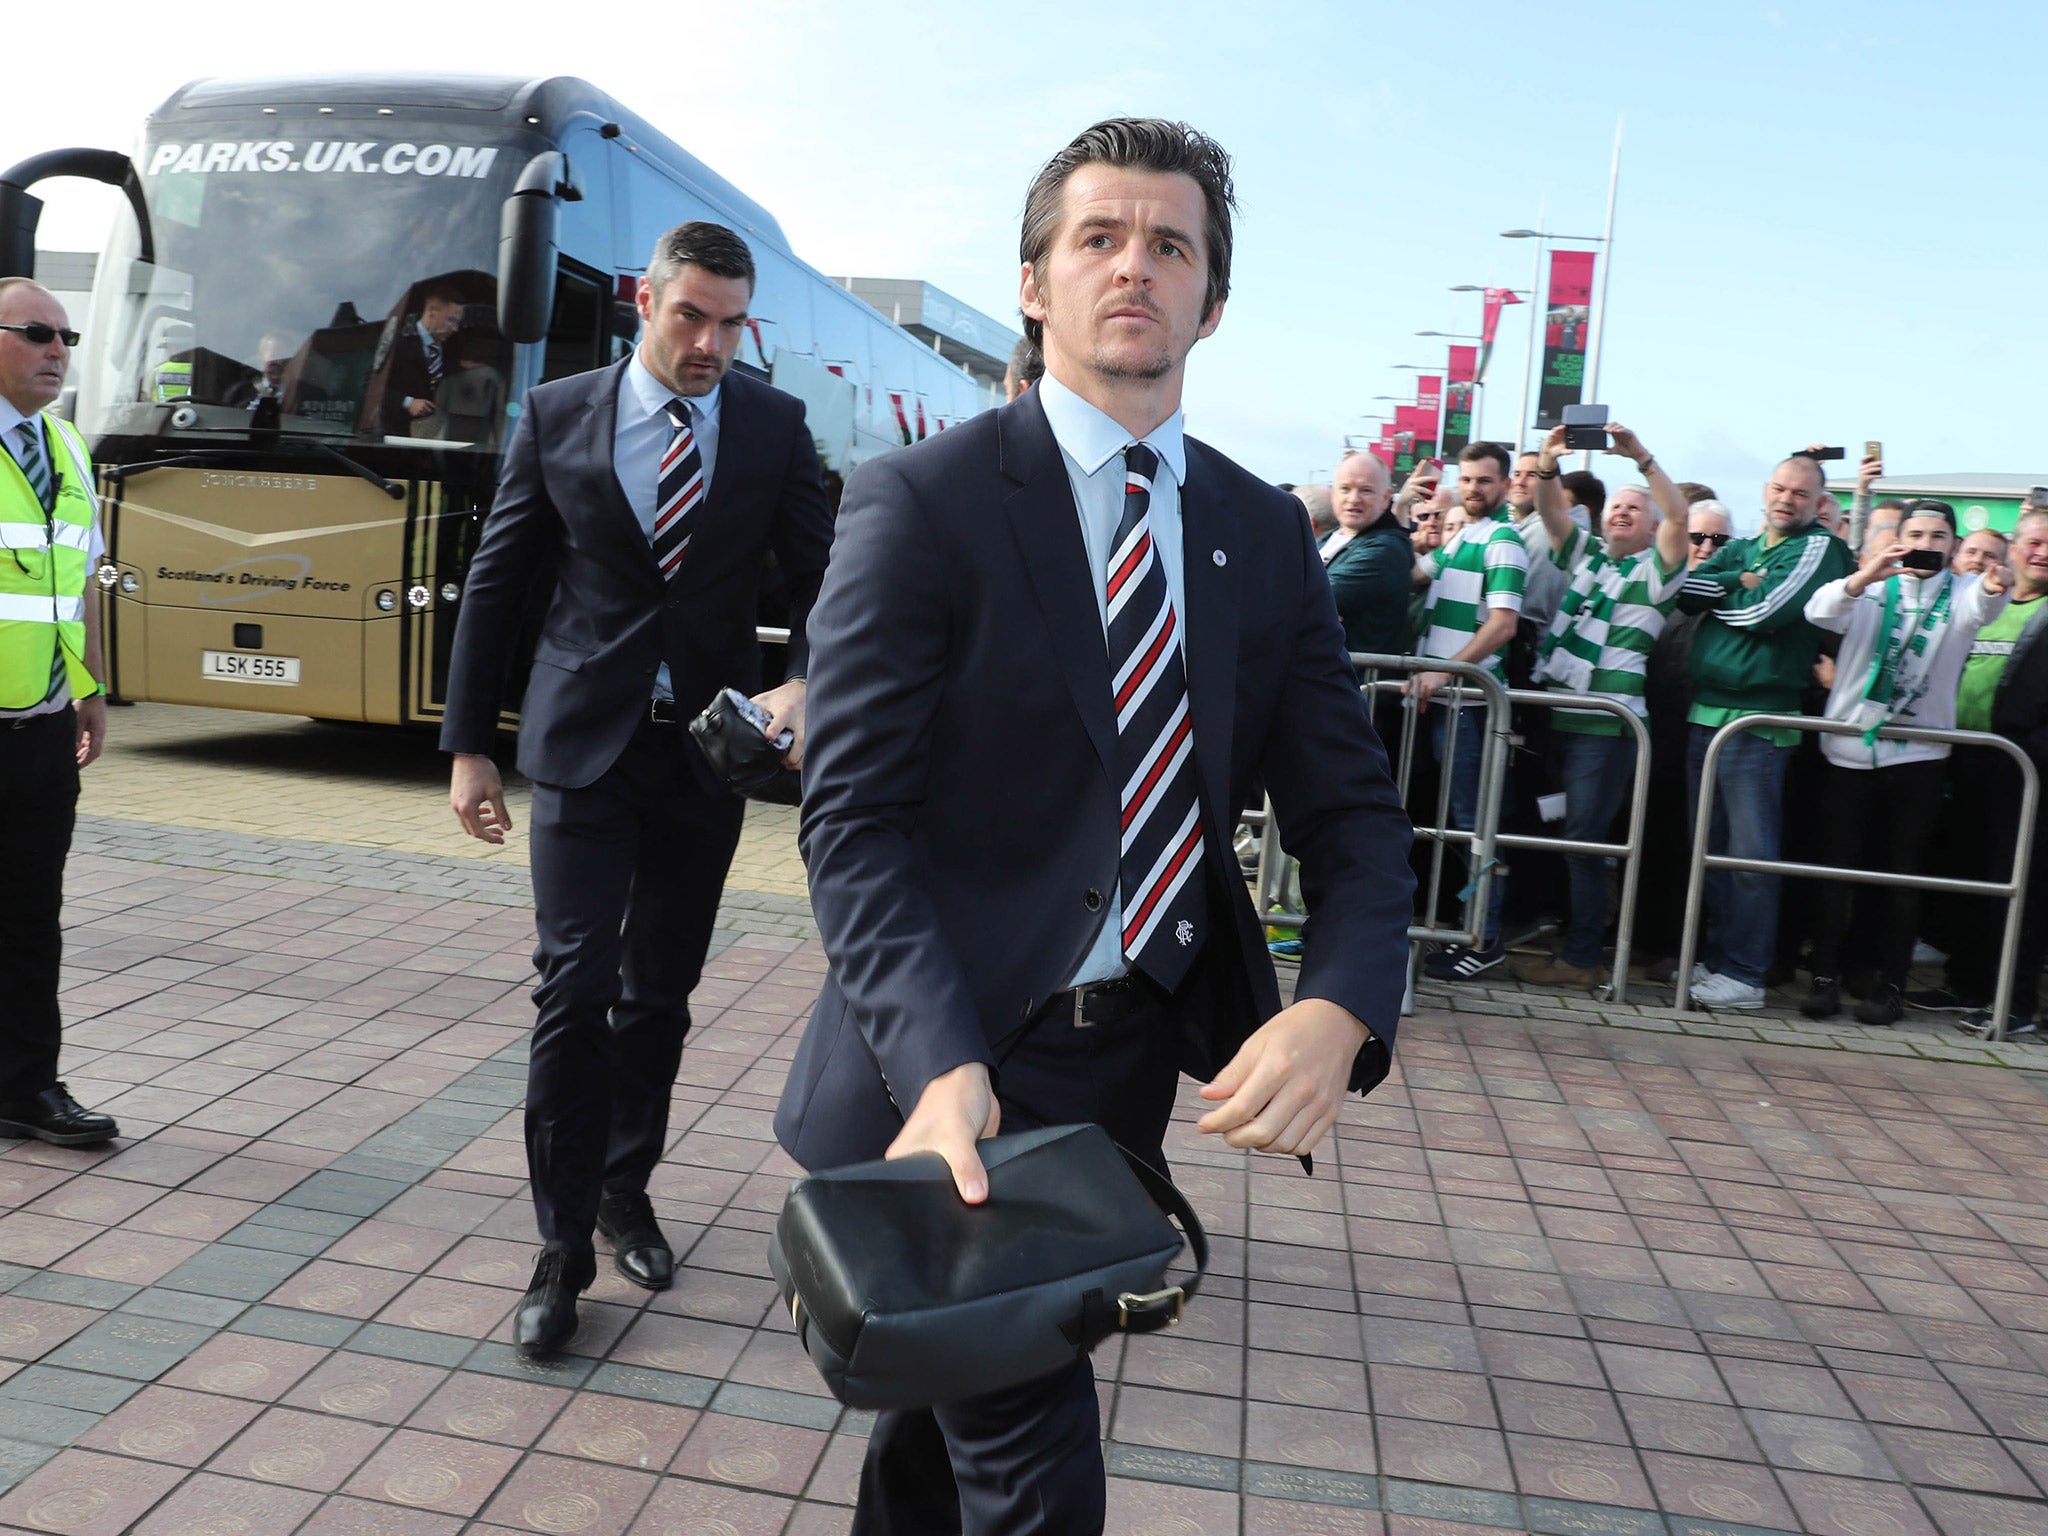 Joey Barton has been suspended by Rangers for three weeks